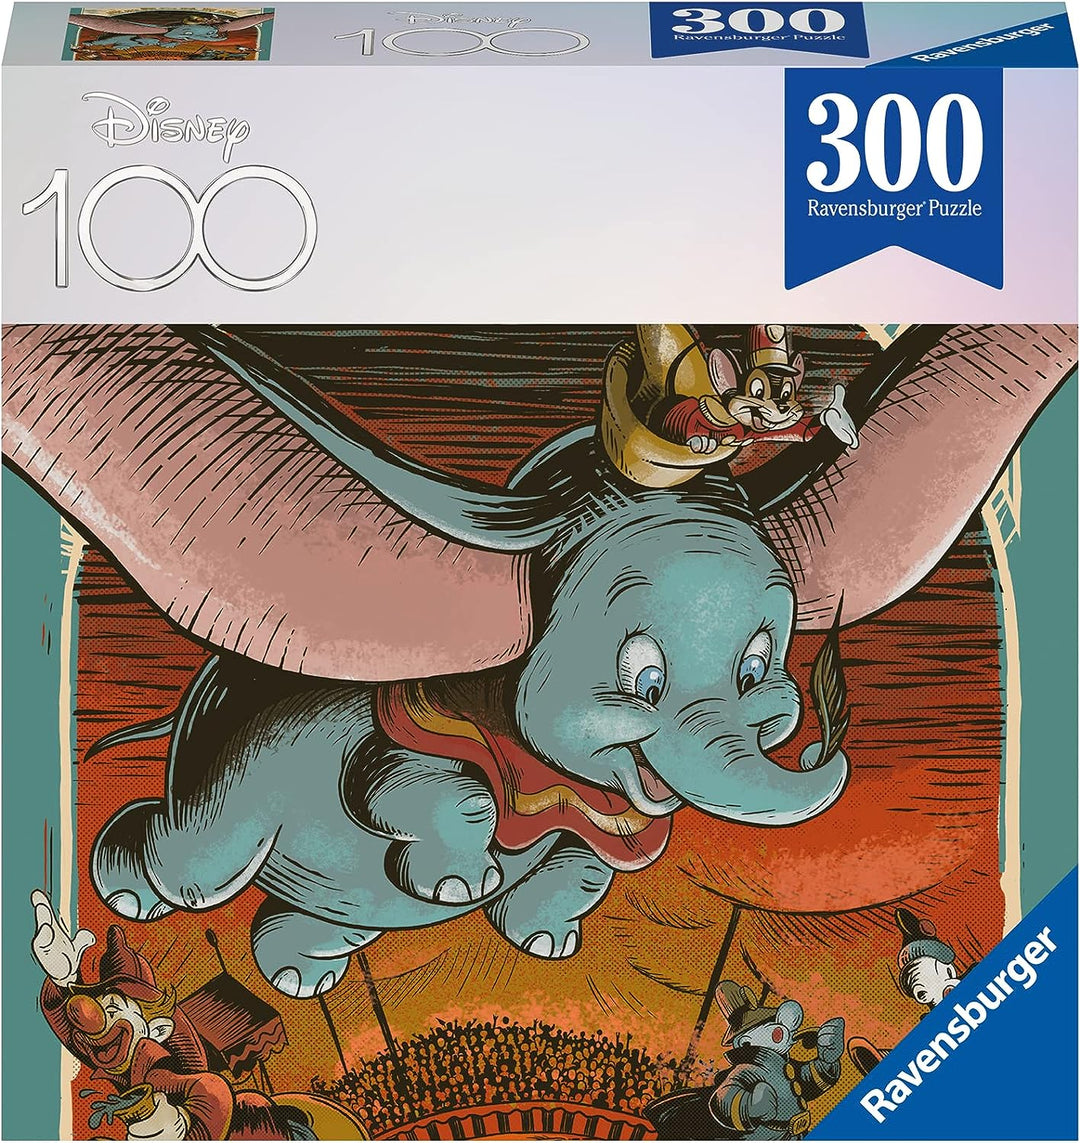 Ravensburger 13370 Disney 100th Anniversary Dumbo Jigsaw Puzzles for Adults and Kids